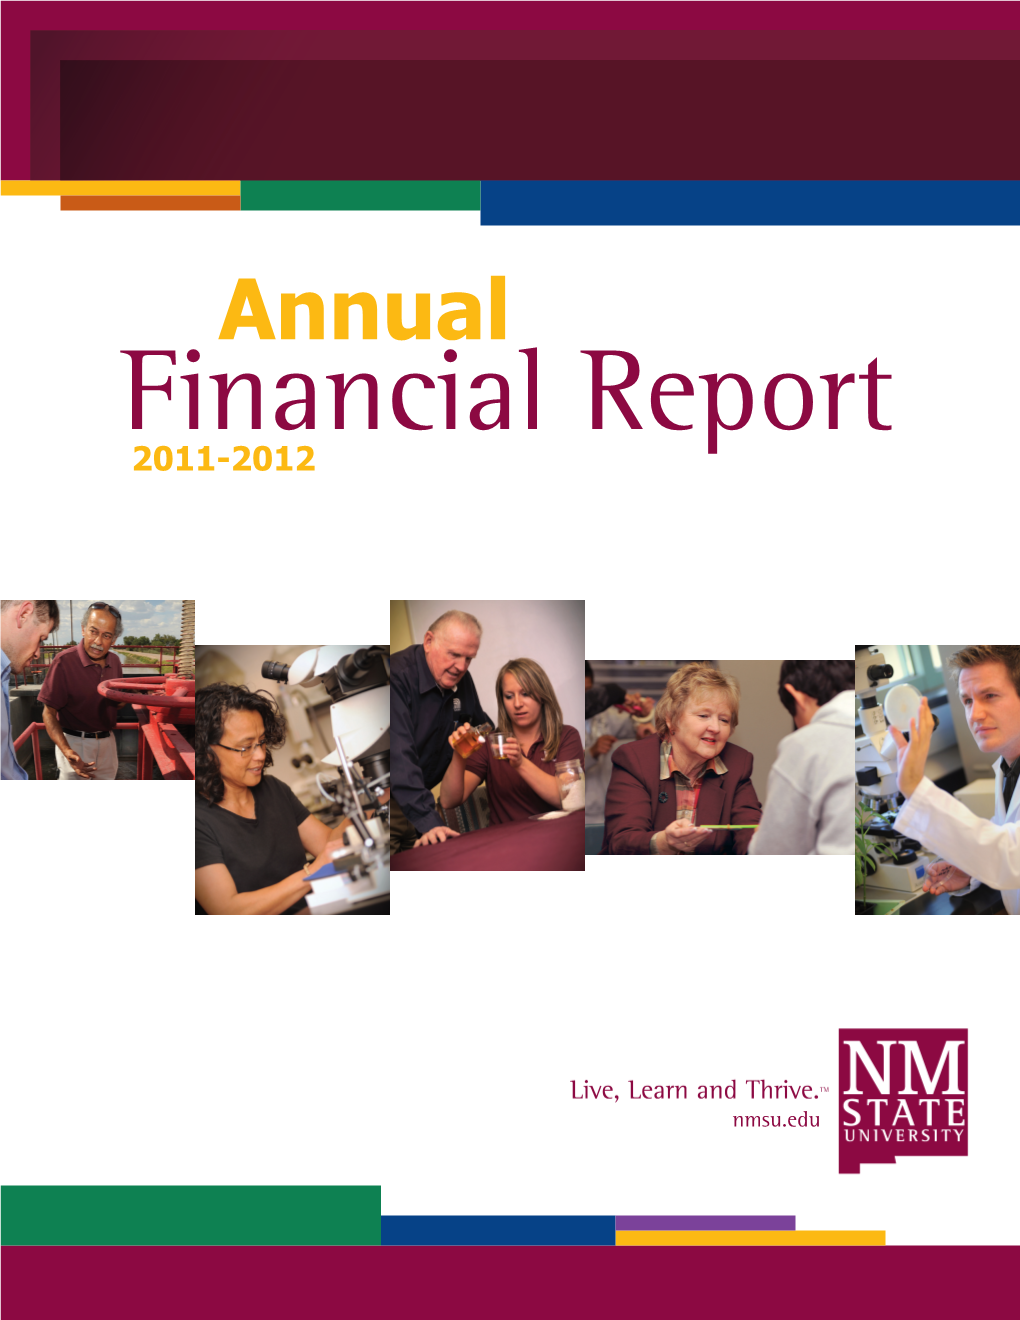 Annual Financial Report 2011-2012